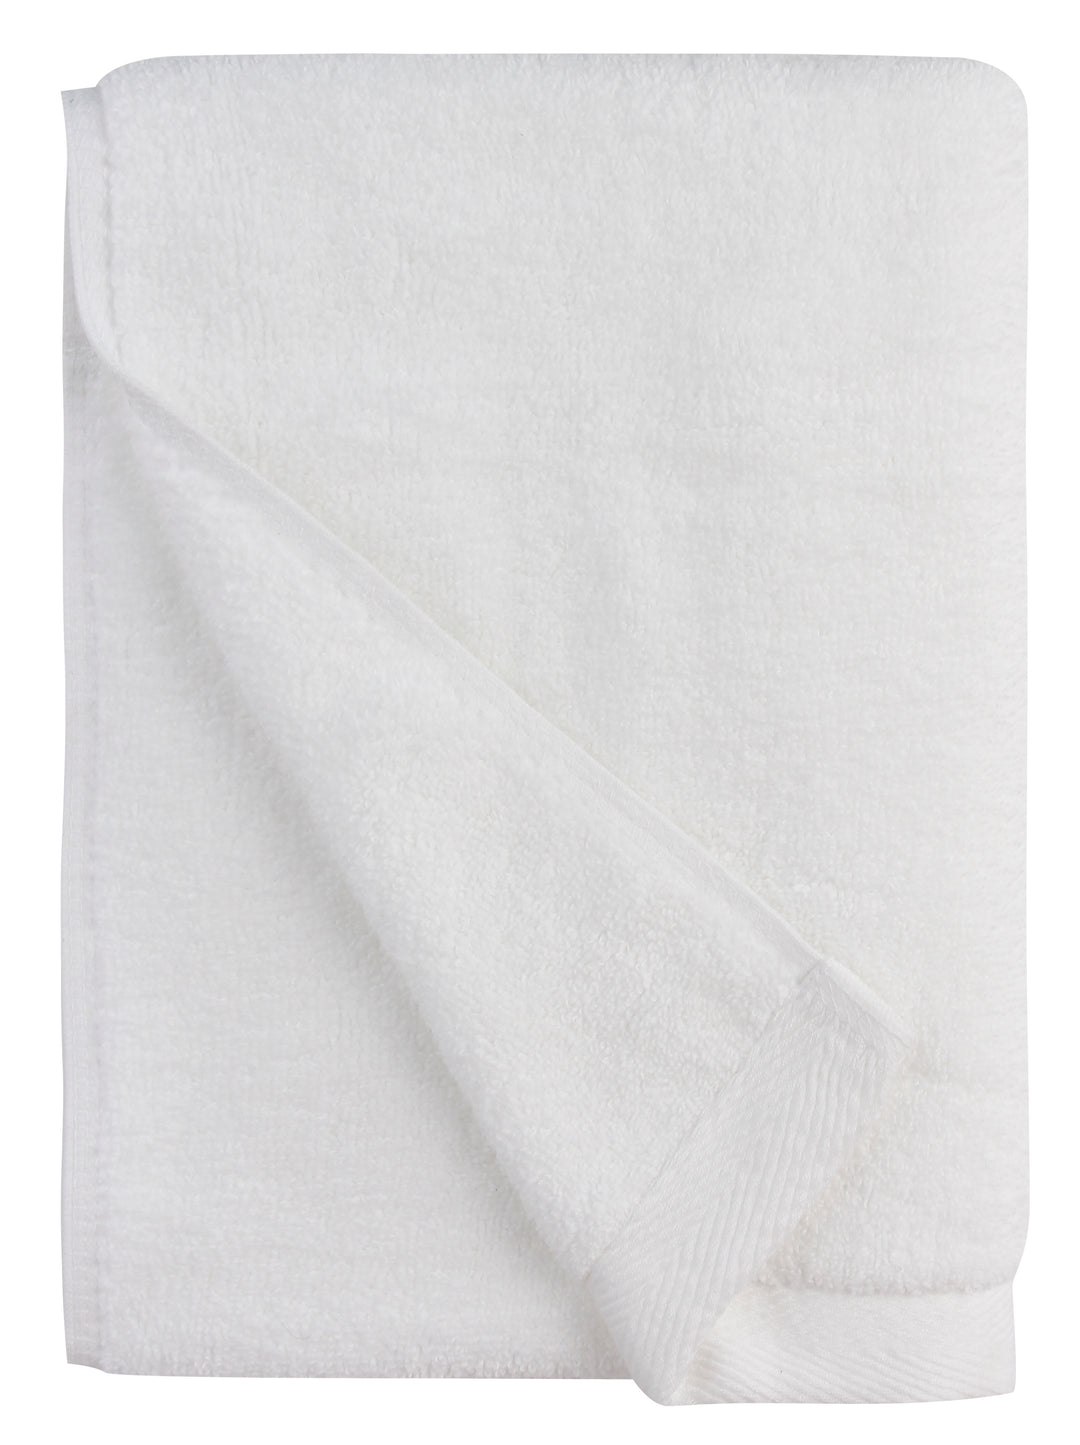 Flat Loop Hand Towels - 4 Pack, Porcelain (White) – The Everplush Company